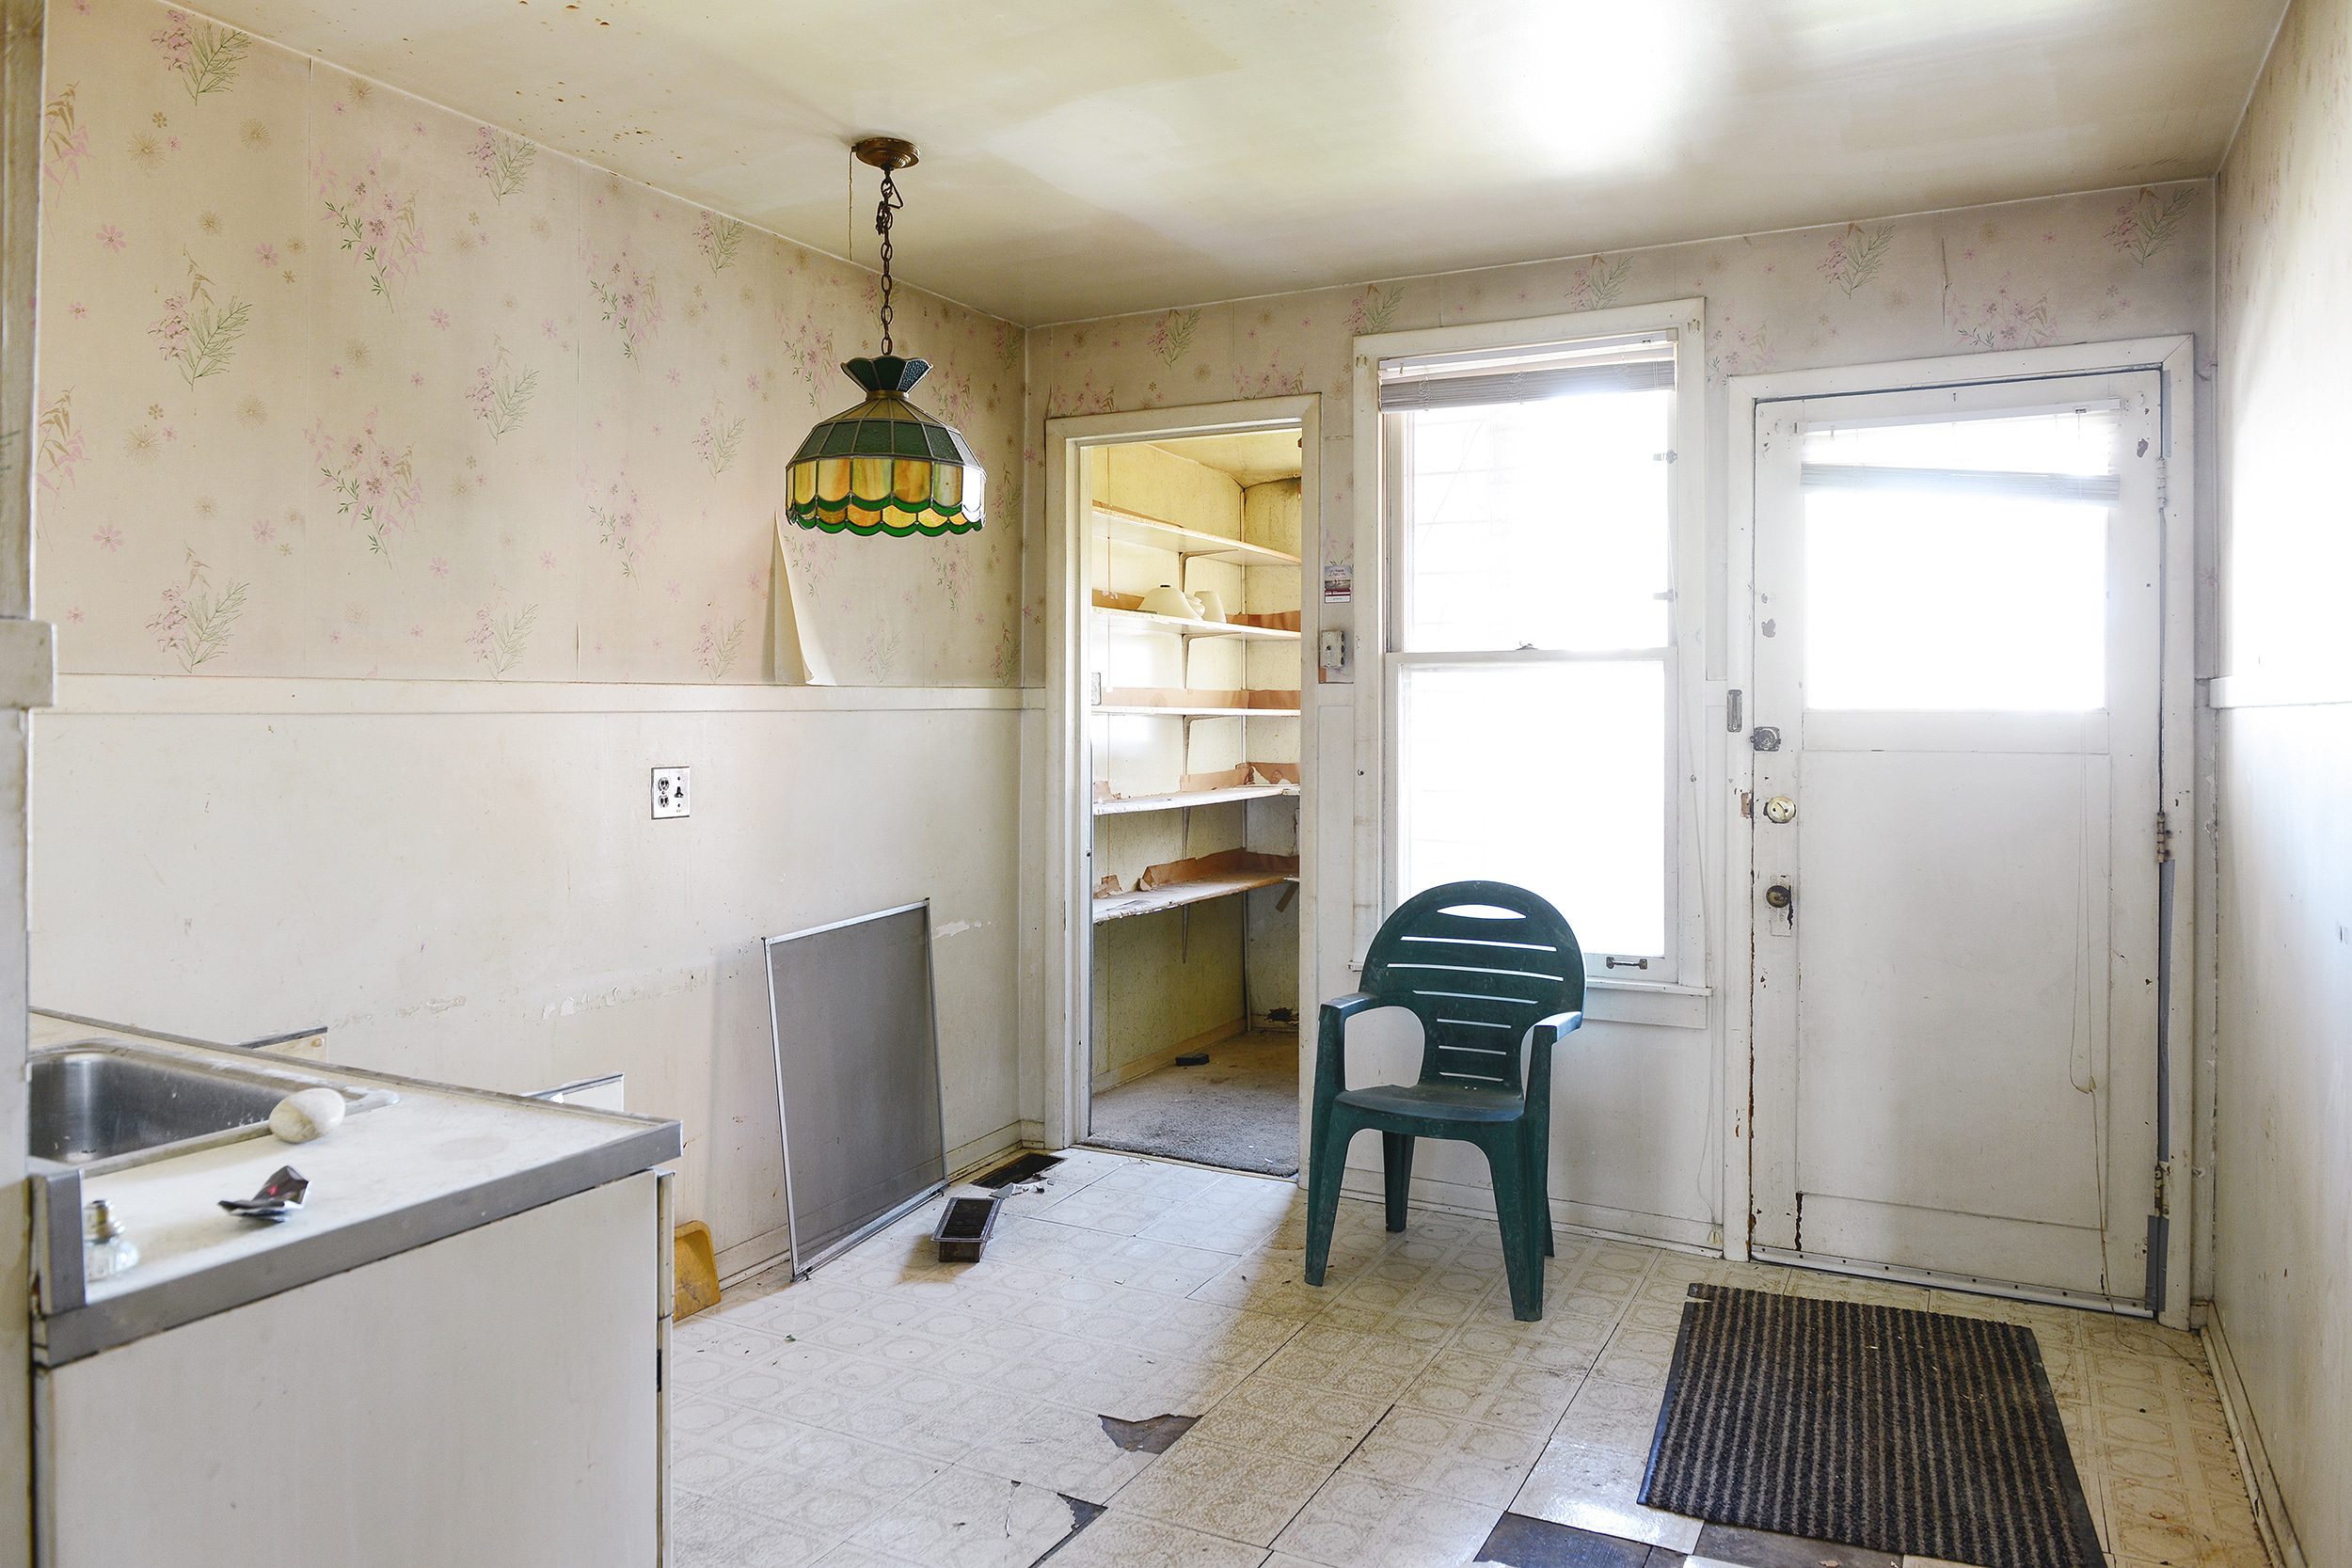 A 'before' photo of a vintage kitchen with peeling wallpaper and floors // via yellow brick home